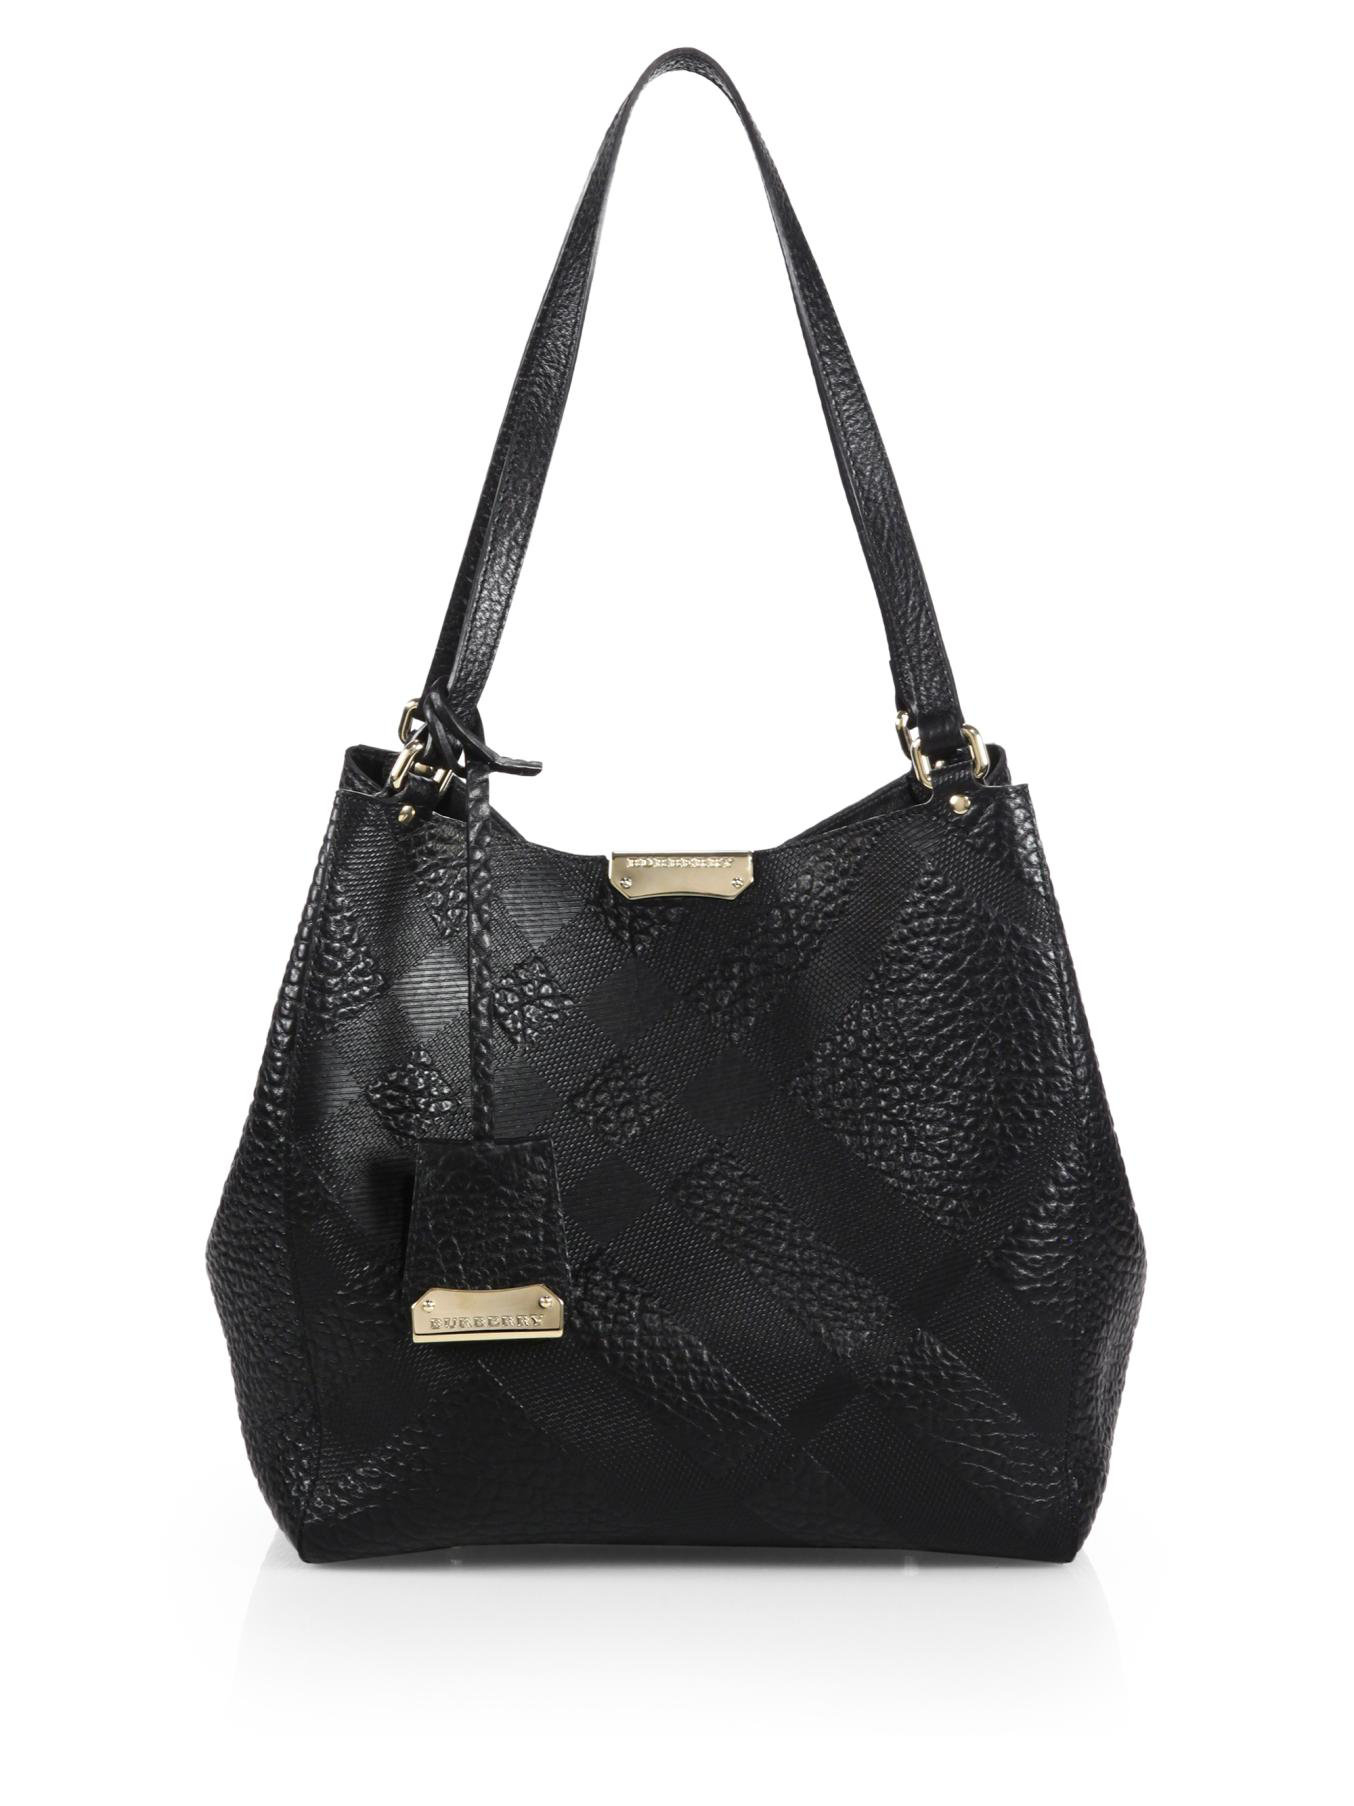 Burberry Leather Canter Small House Check-embossed Pebbled Shoulder Bag in Black - Lyst